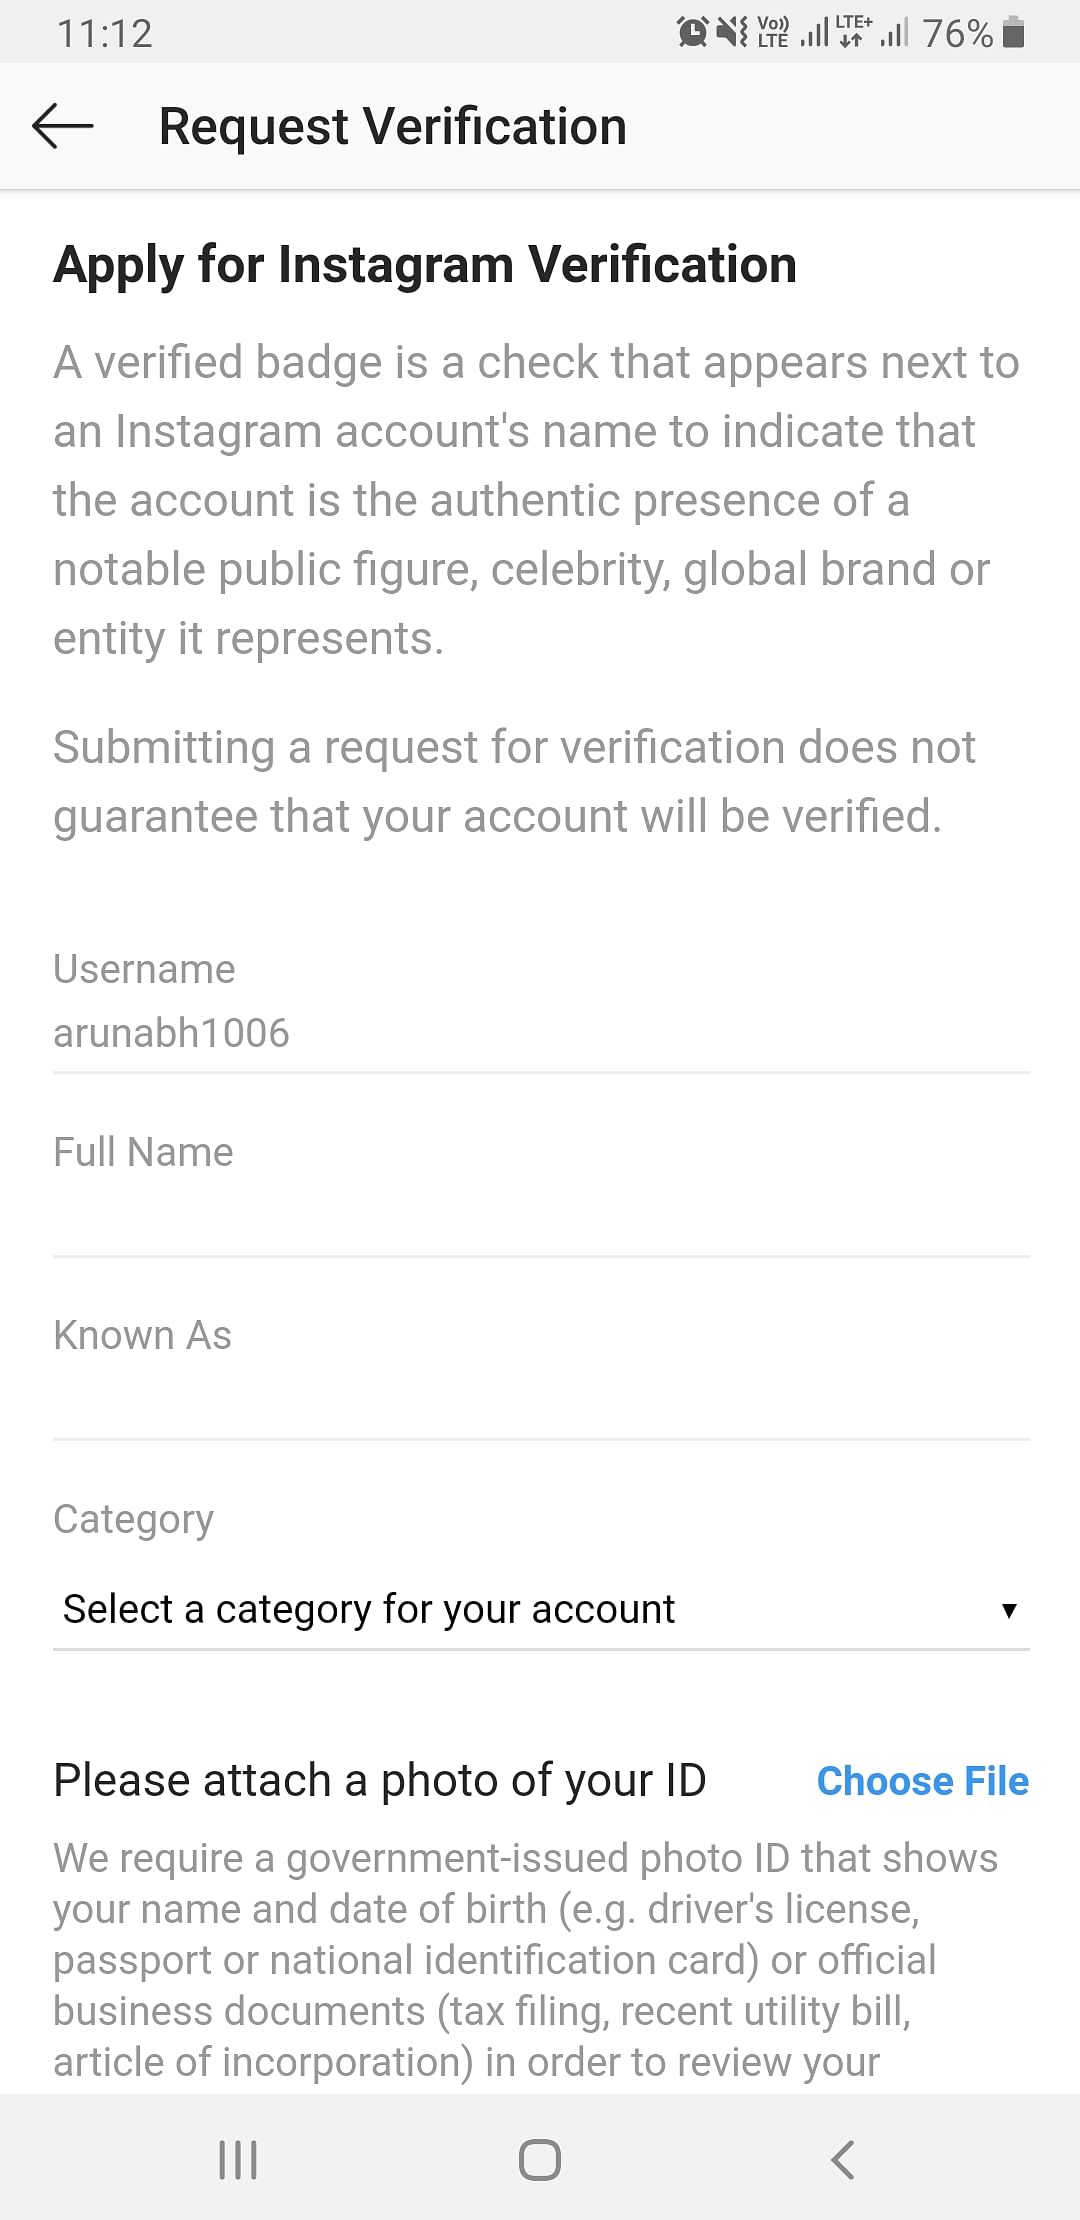 There is a way for users to get their Instagram accounts verified without paying a single dime.